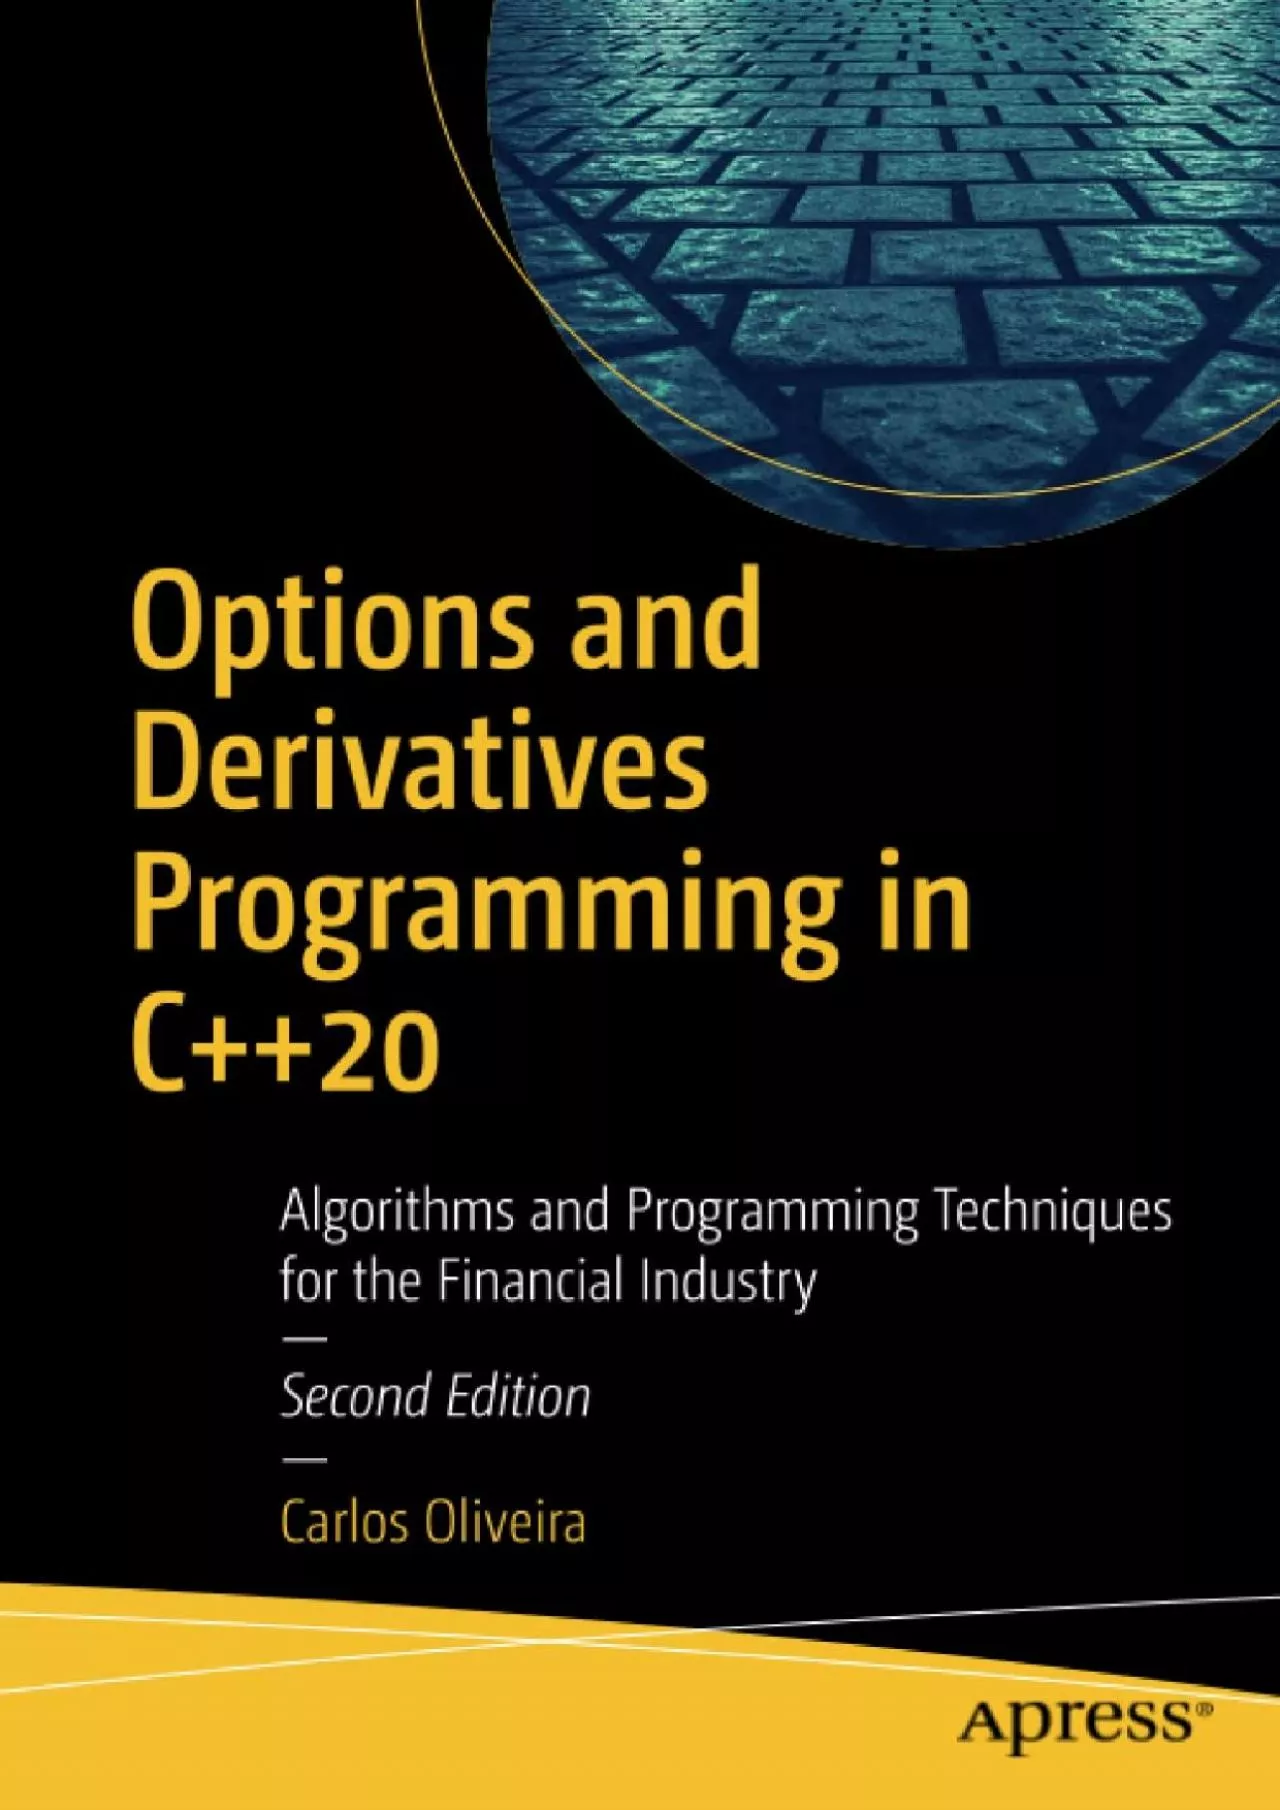 [FREE]-Options and Derivatives Programming in C++20: Algorithms and Programming Techniques